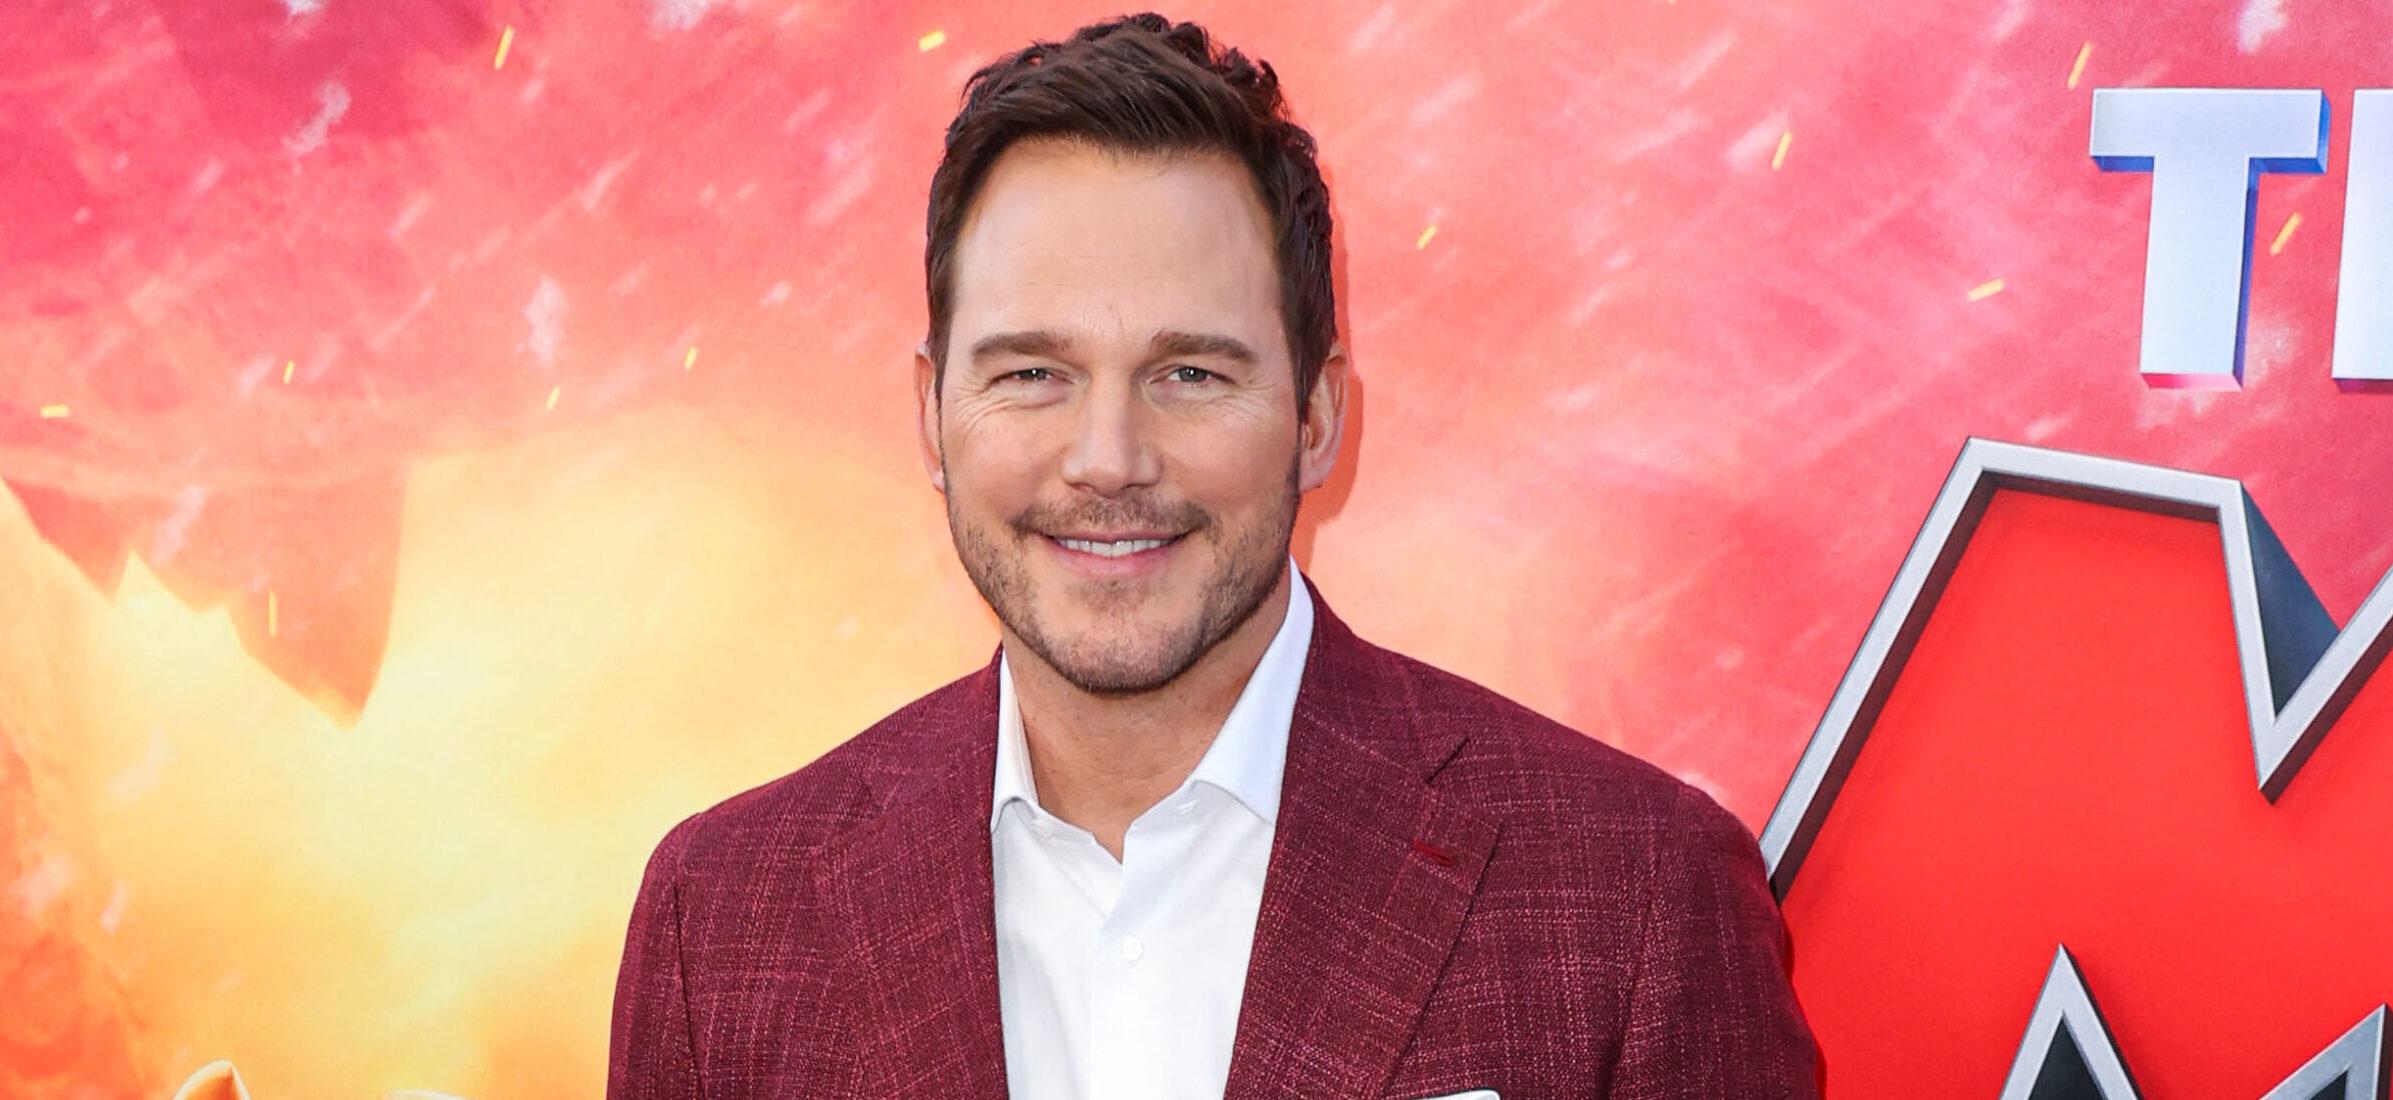 'GOTG' Star Chris Pratt References Jesus On Dealing With Haters: '2,000 Years Ago, They Hated Him Too'